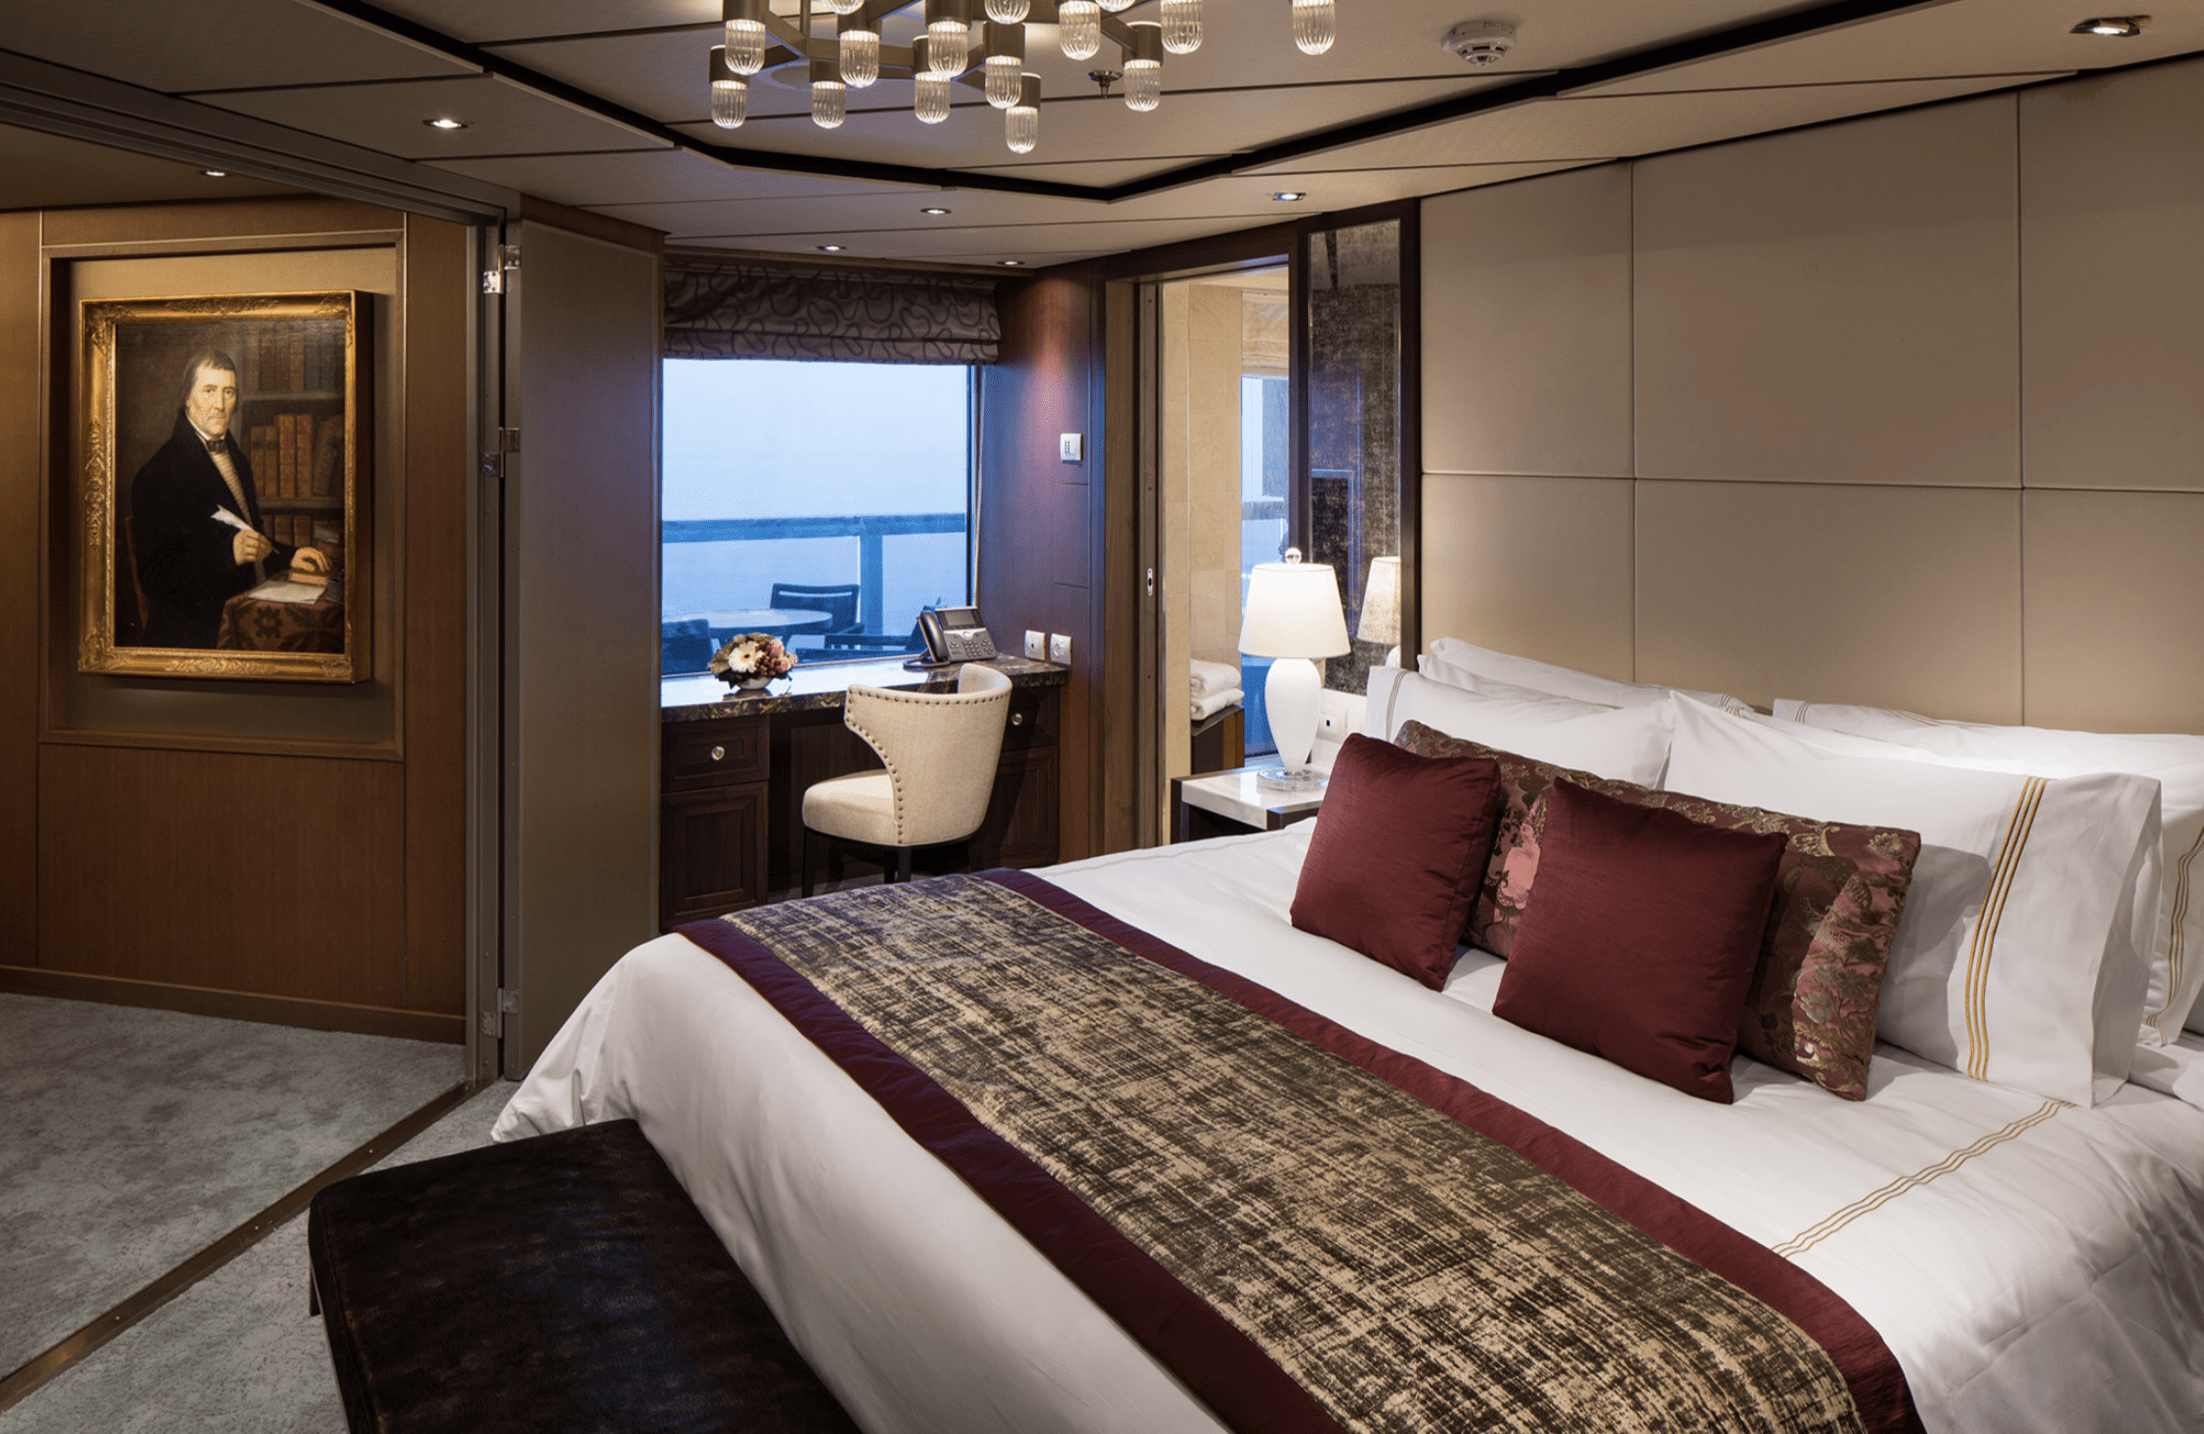 Holland America updates its staterooms aboard the new Nieuw Statendam